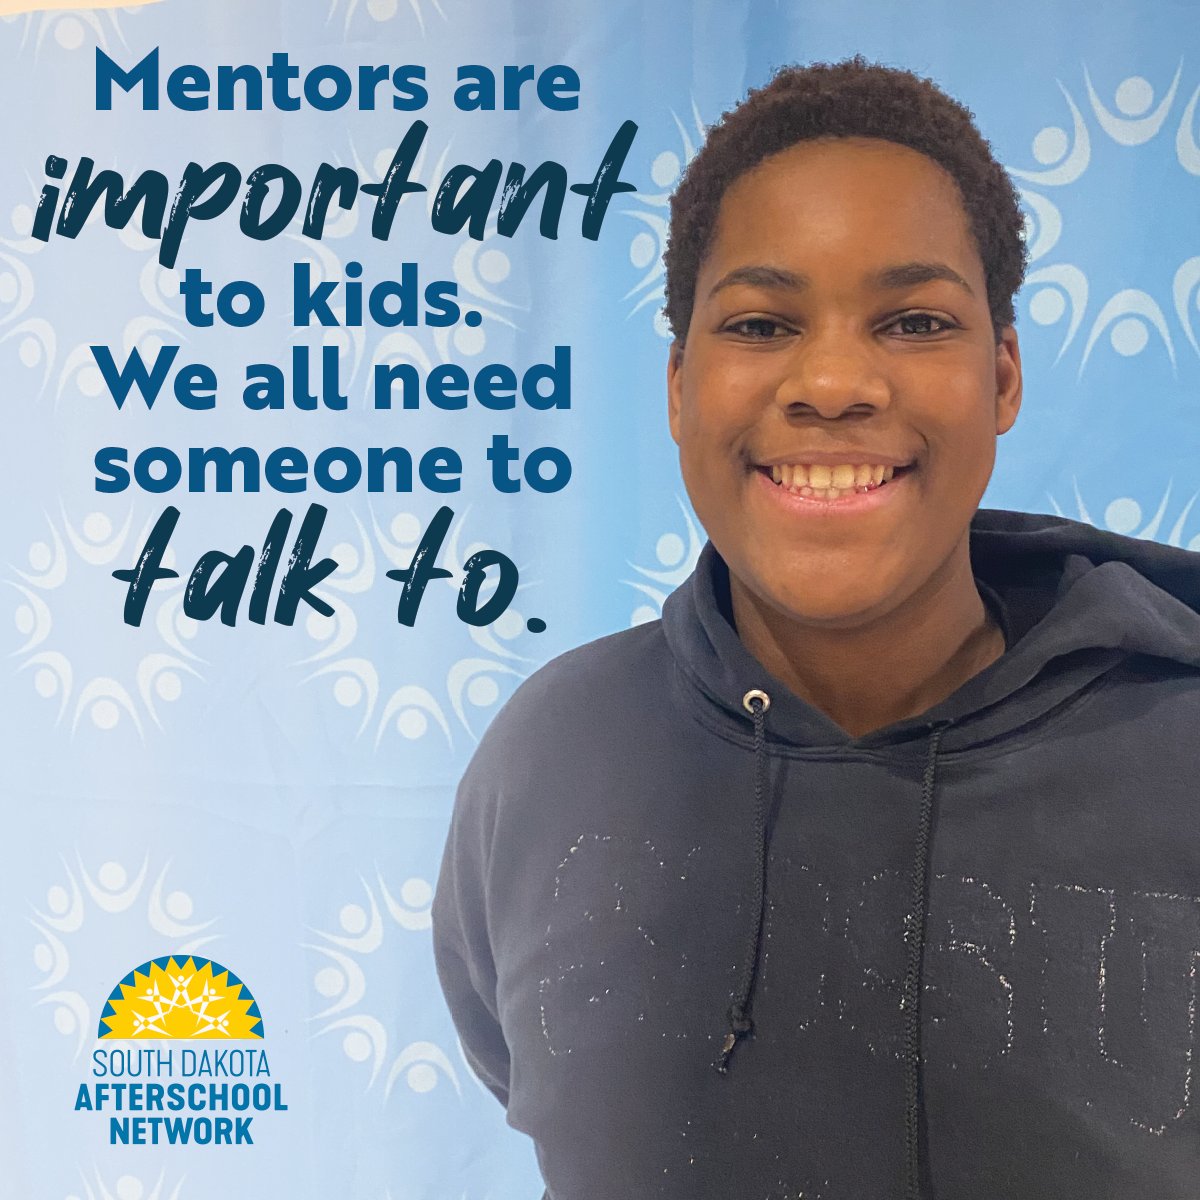 #YouthVoiceWeek starts today March 23. Through March 31 we will be lifting up South Dakota #youthvoices, starting with Yusuf a member of the Boys & Girls Club. 

Yusuf knows #mentors are important, just like the ones he's found at his #afterschool program. 

#AfterschoolWorks